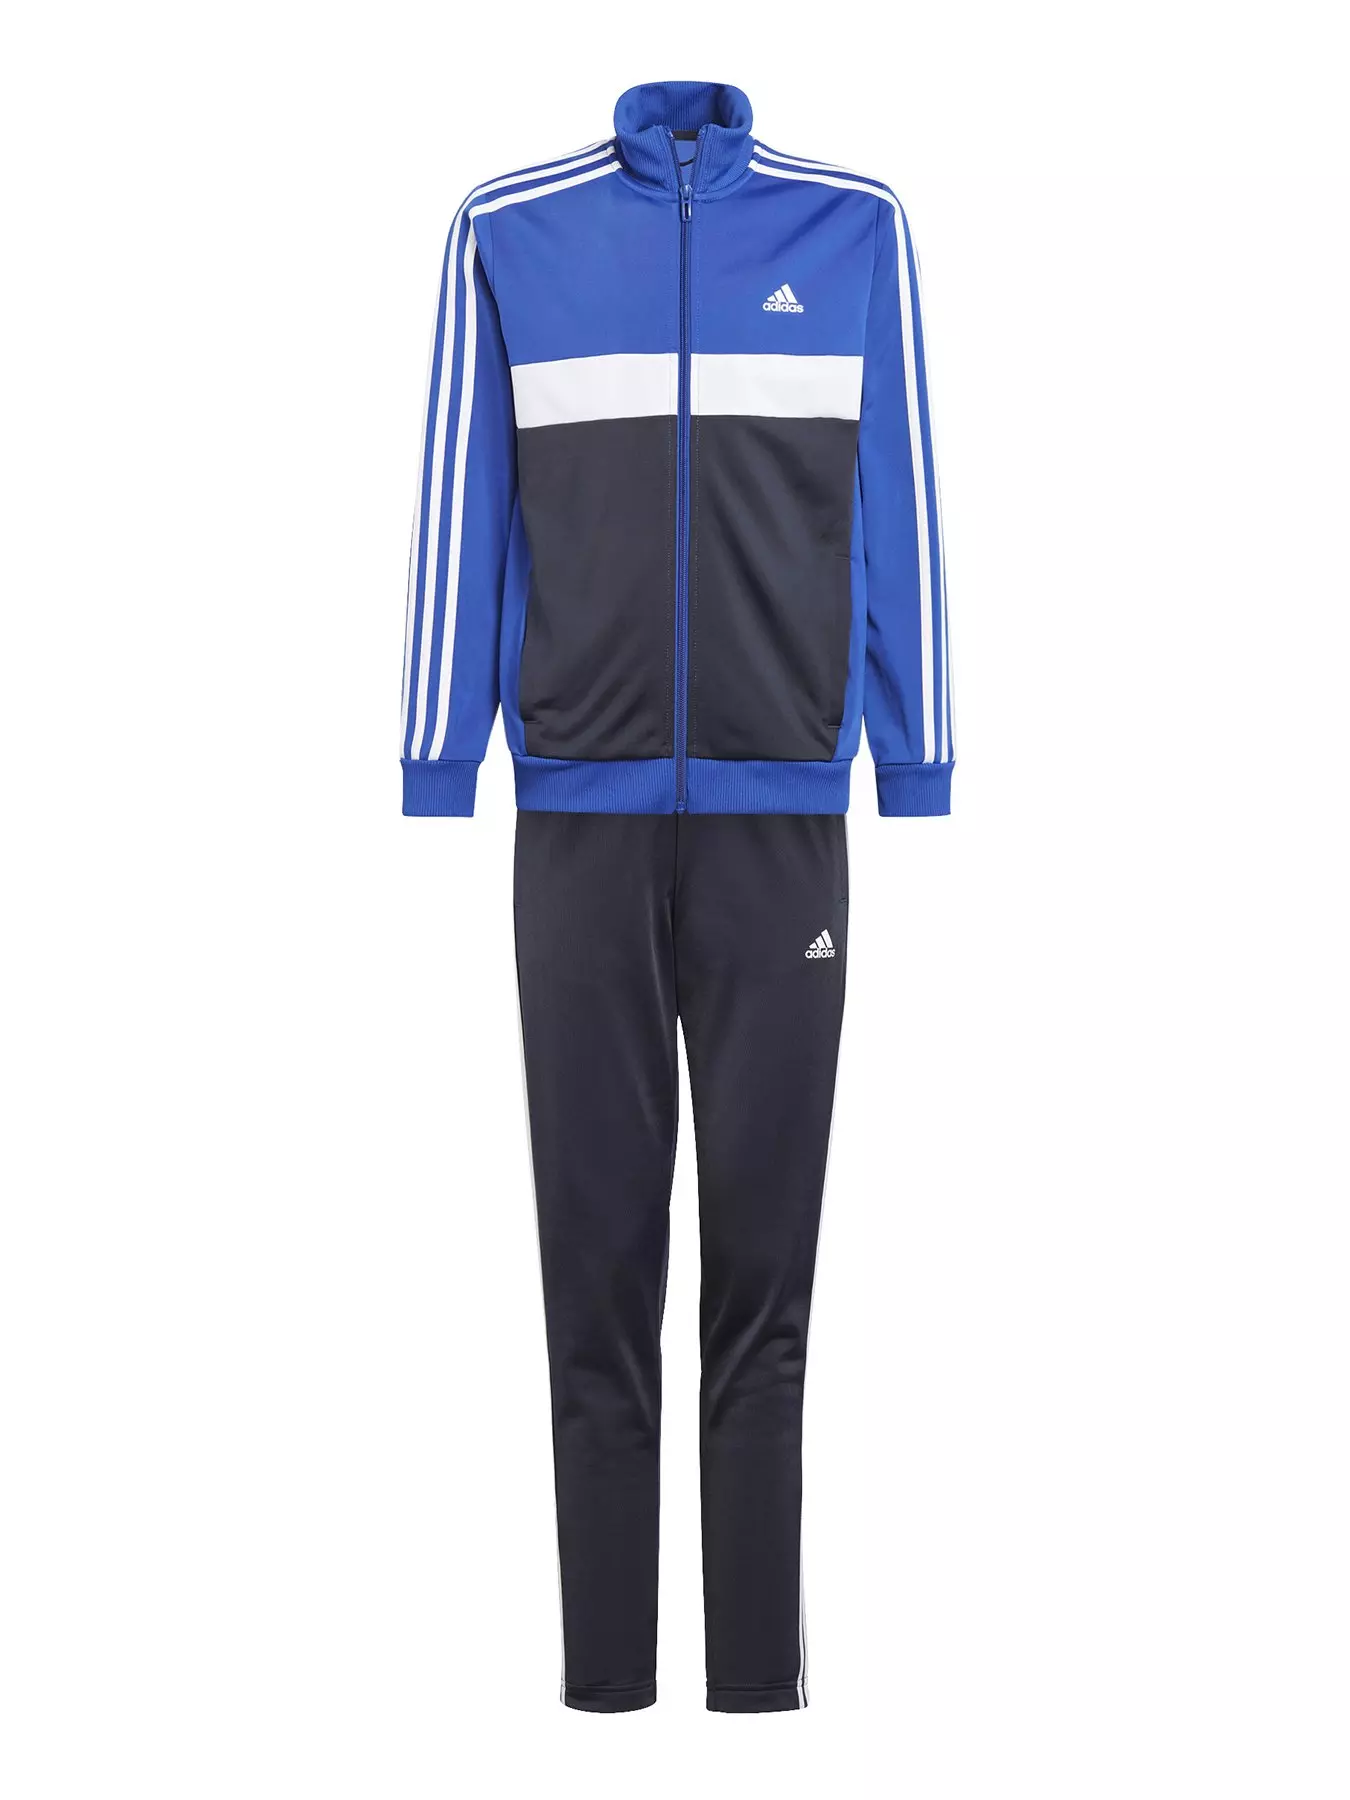 adidas Sportswear Color block sweatpants in green and navy